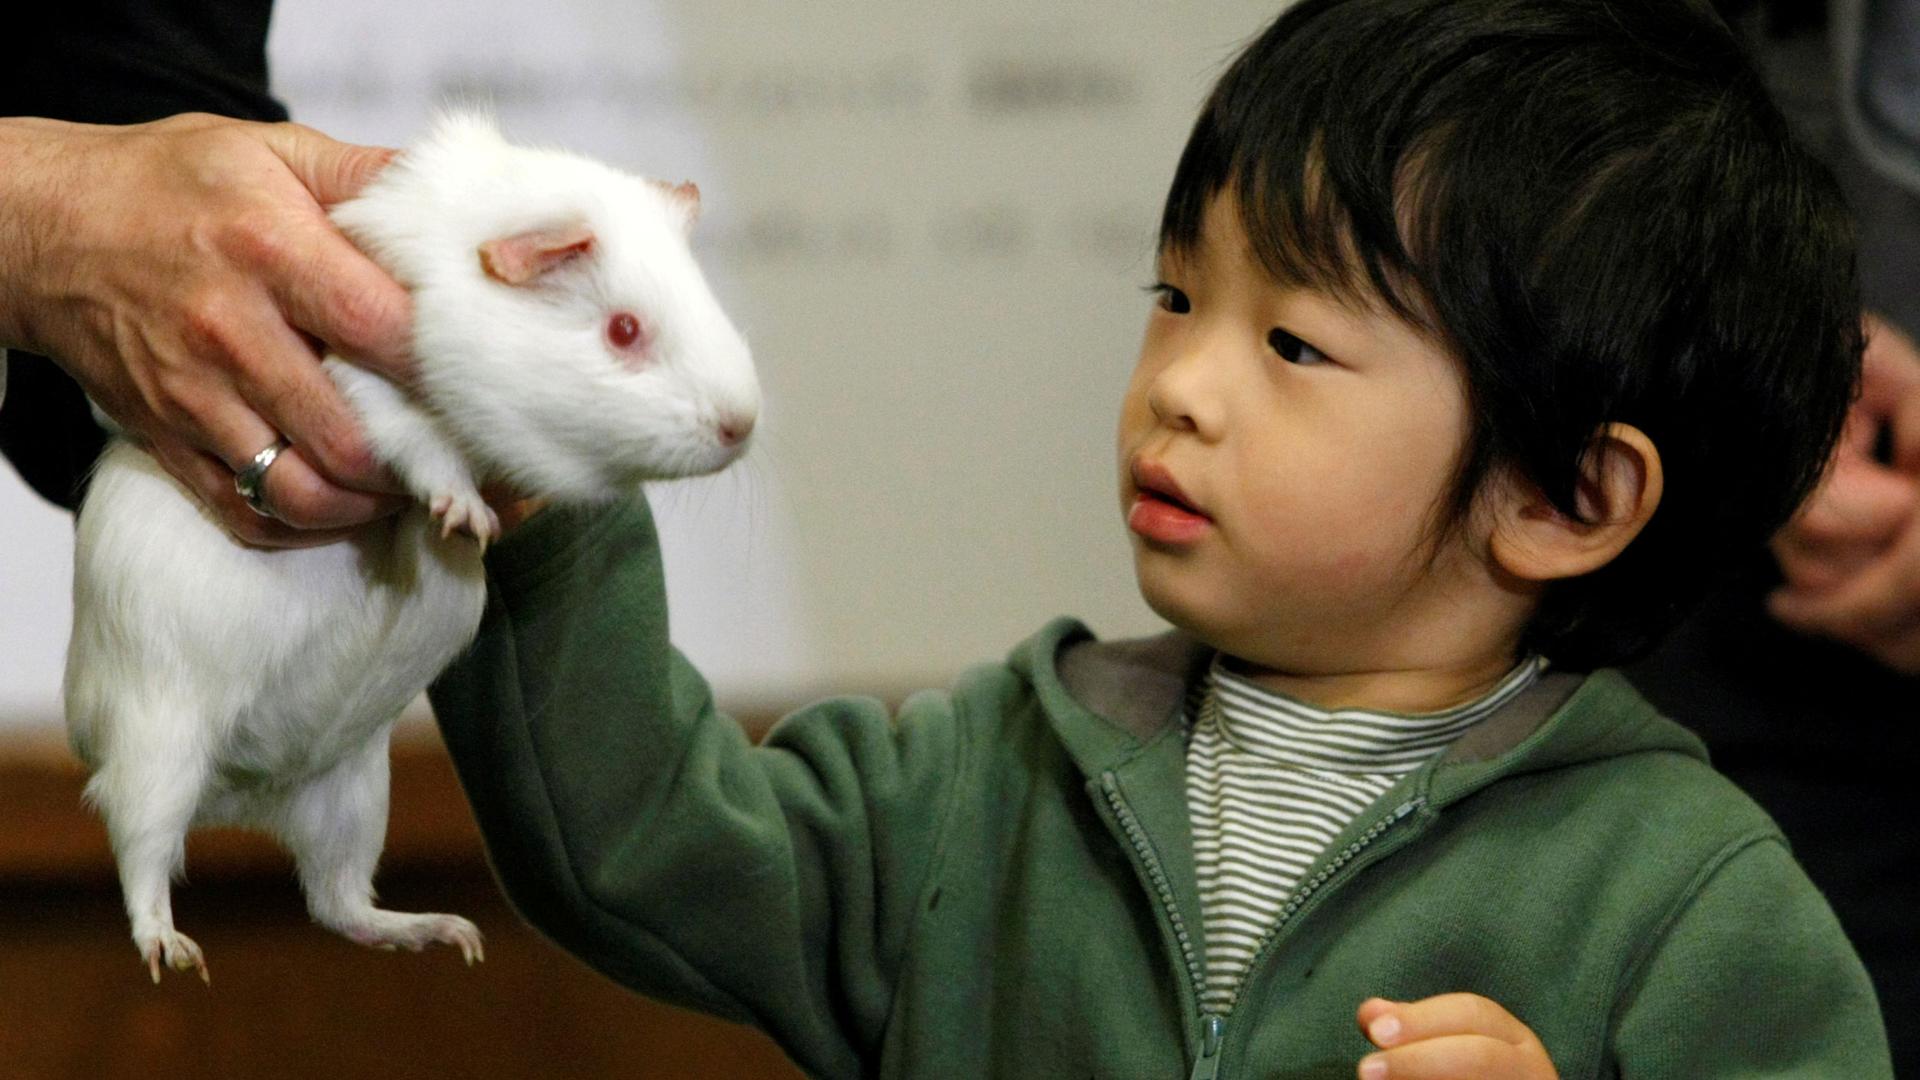 A small child touches a guinea pig